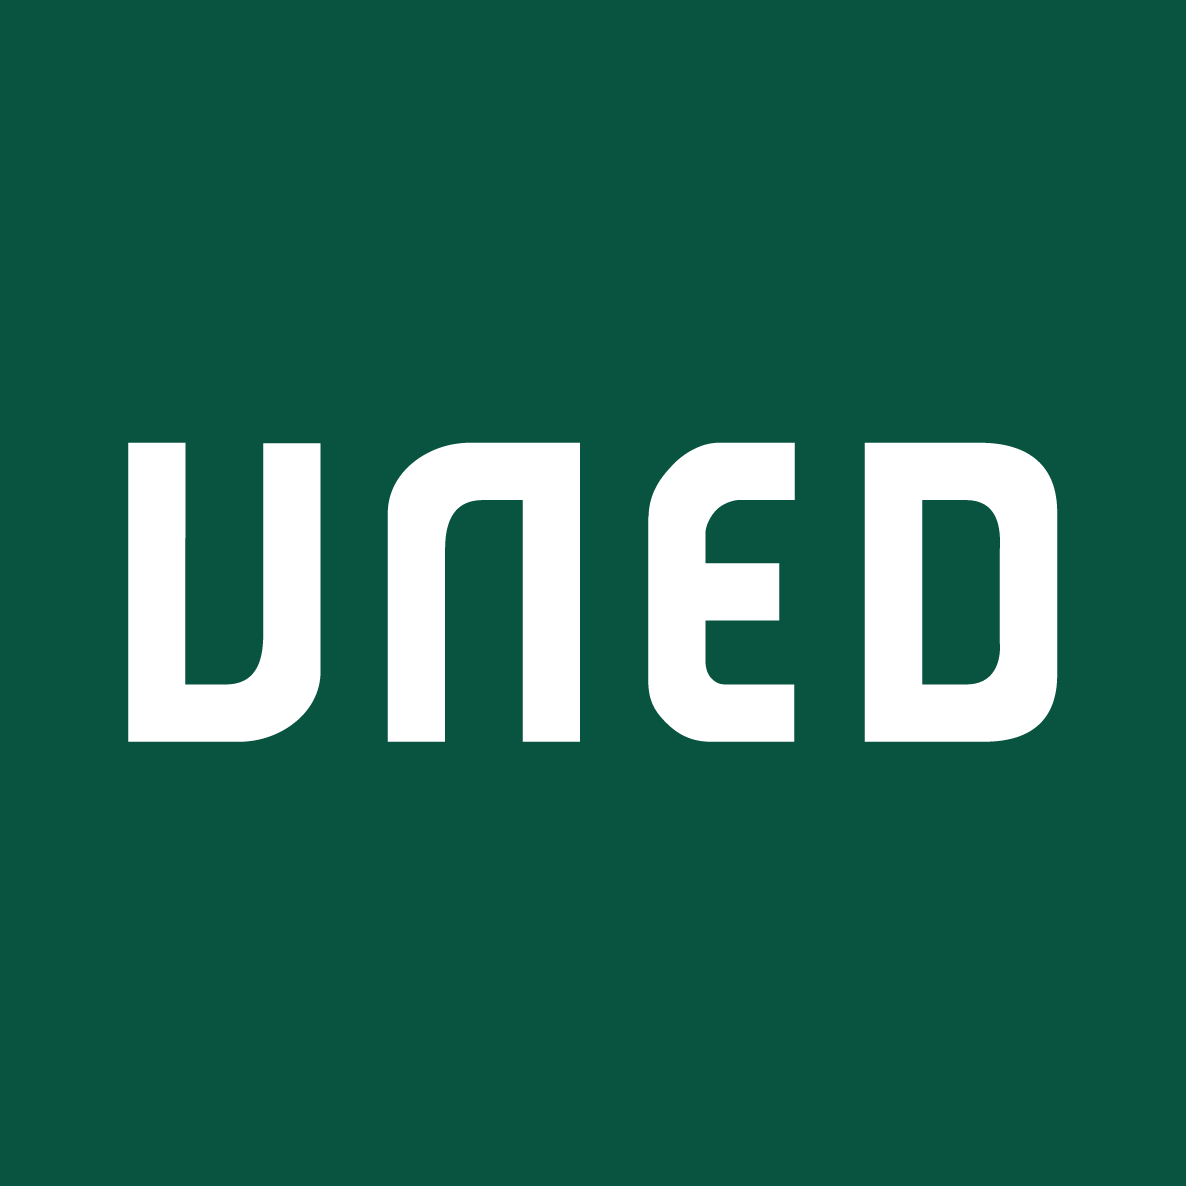 UNED Logo [National University of Distance Education] png